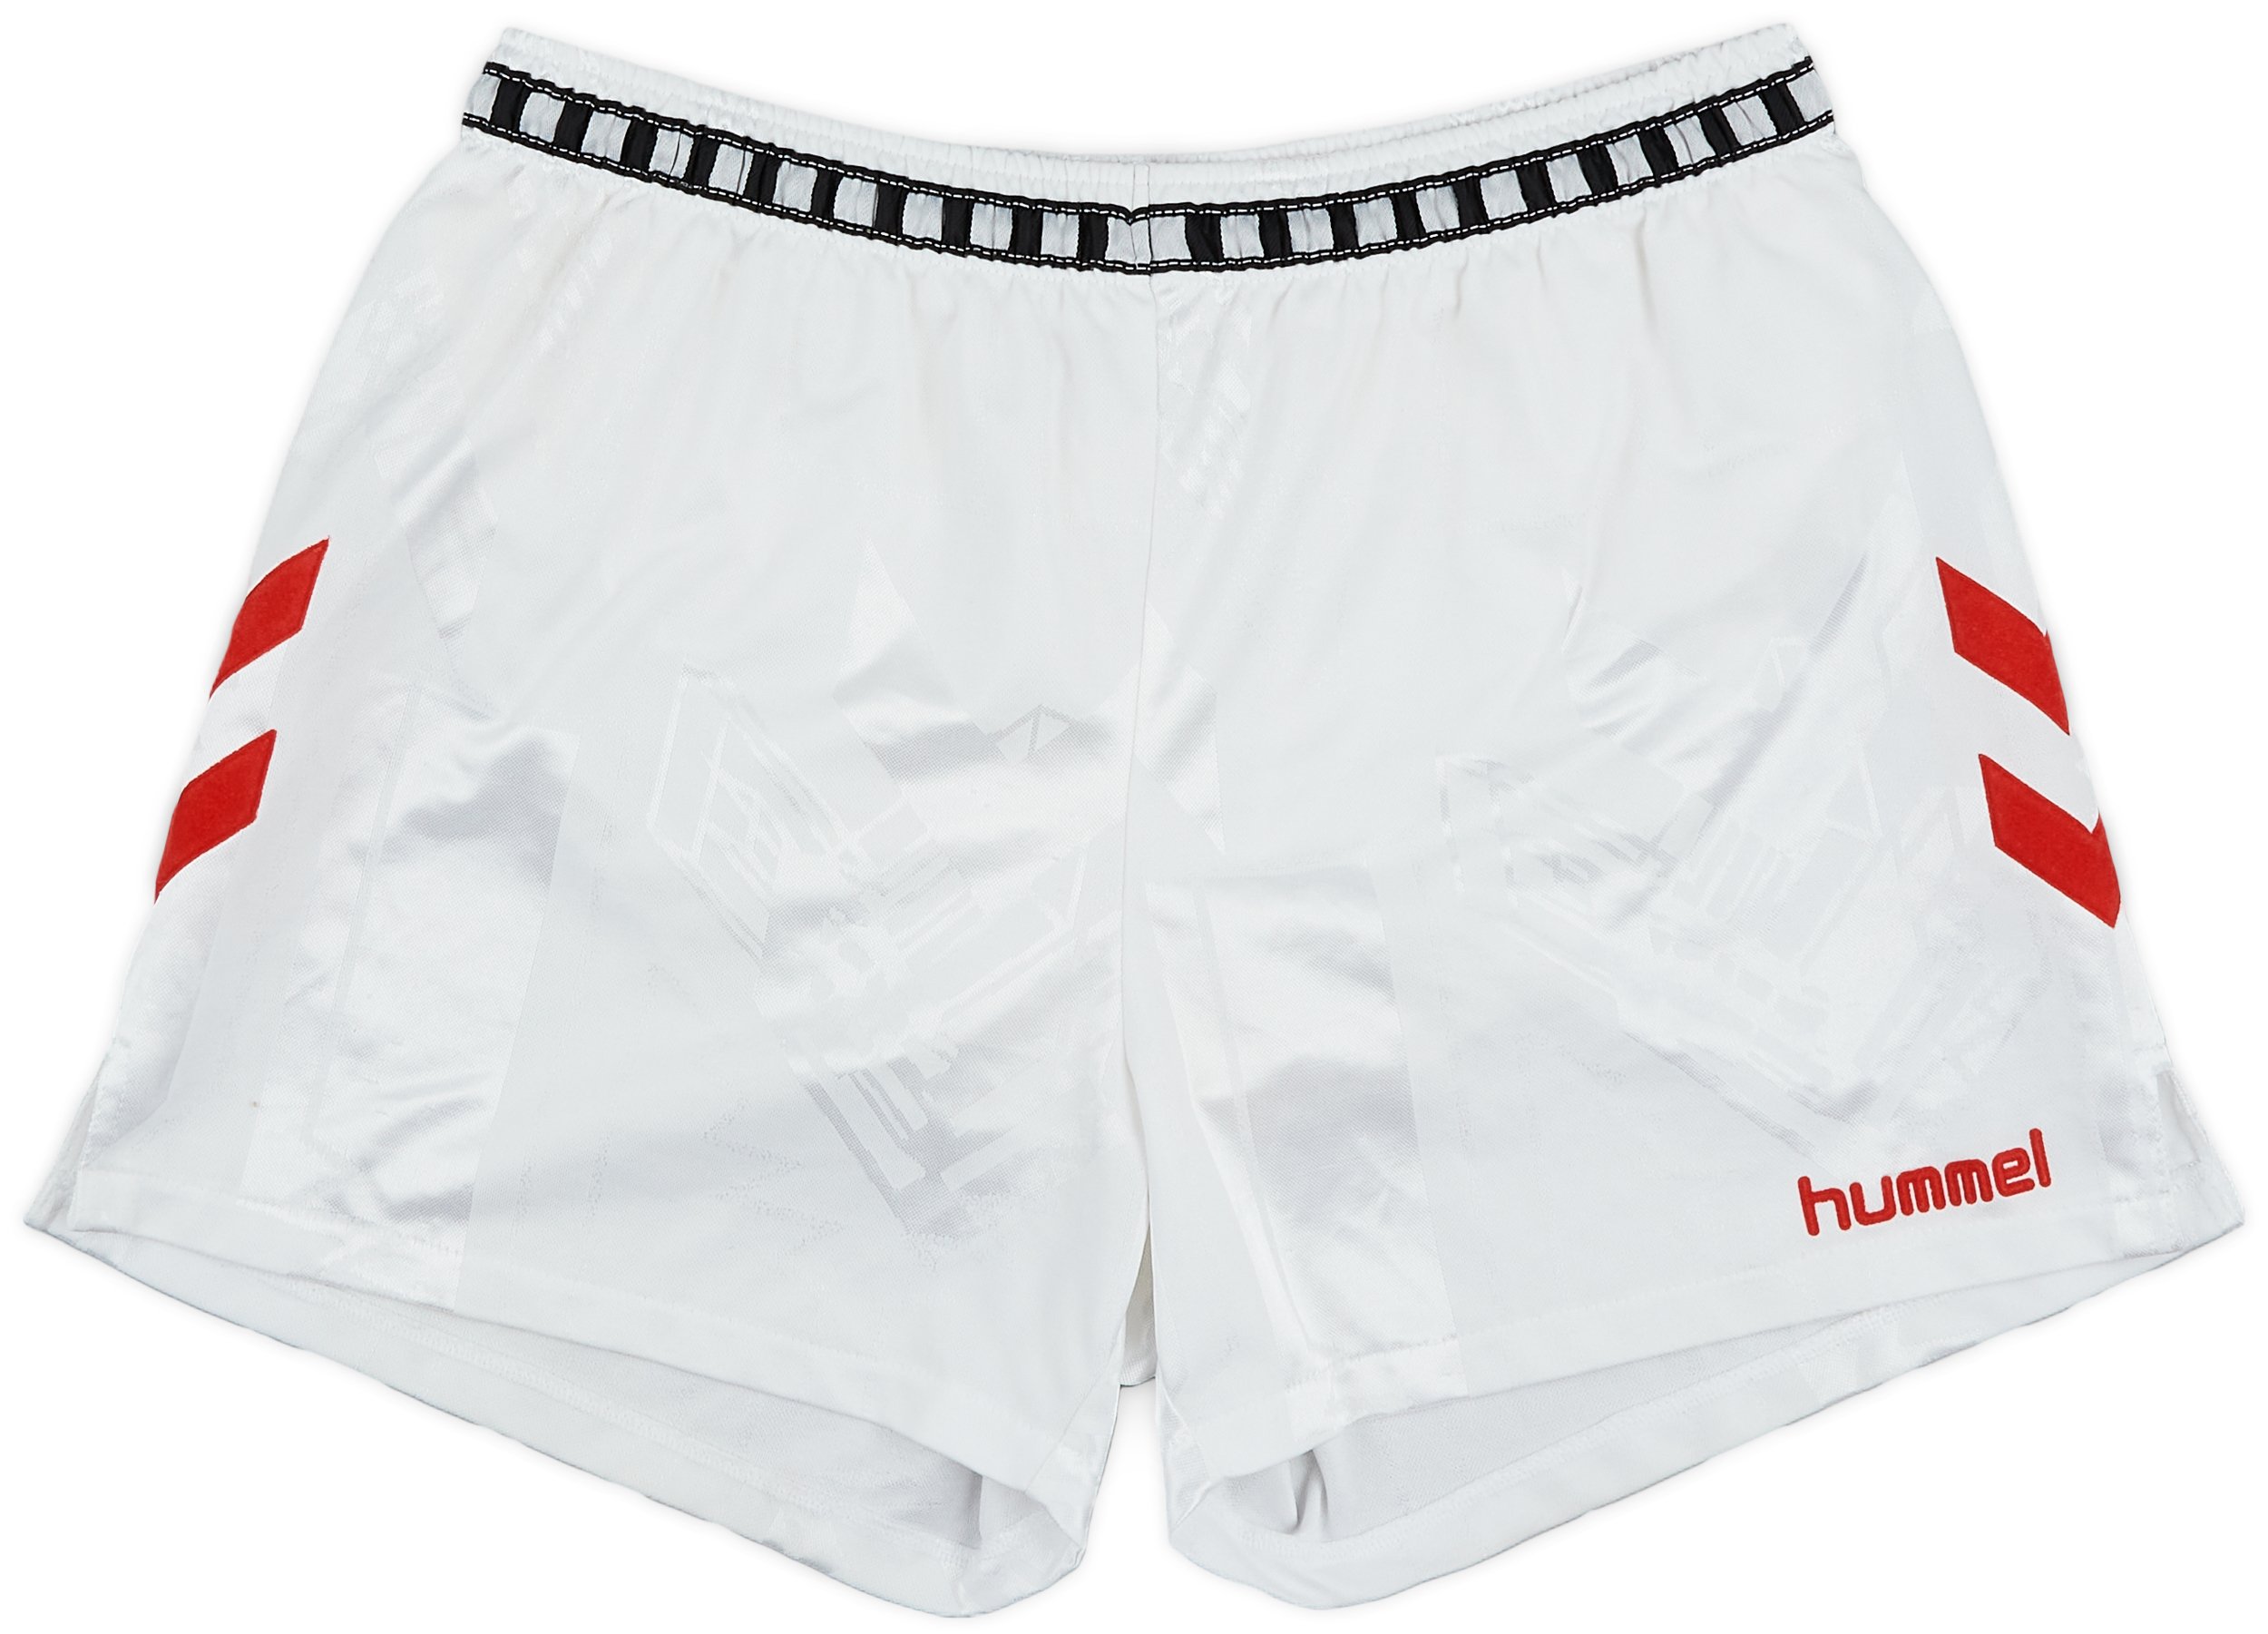 1990s Template Shorts - Very Good 6/10 (M)